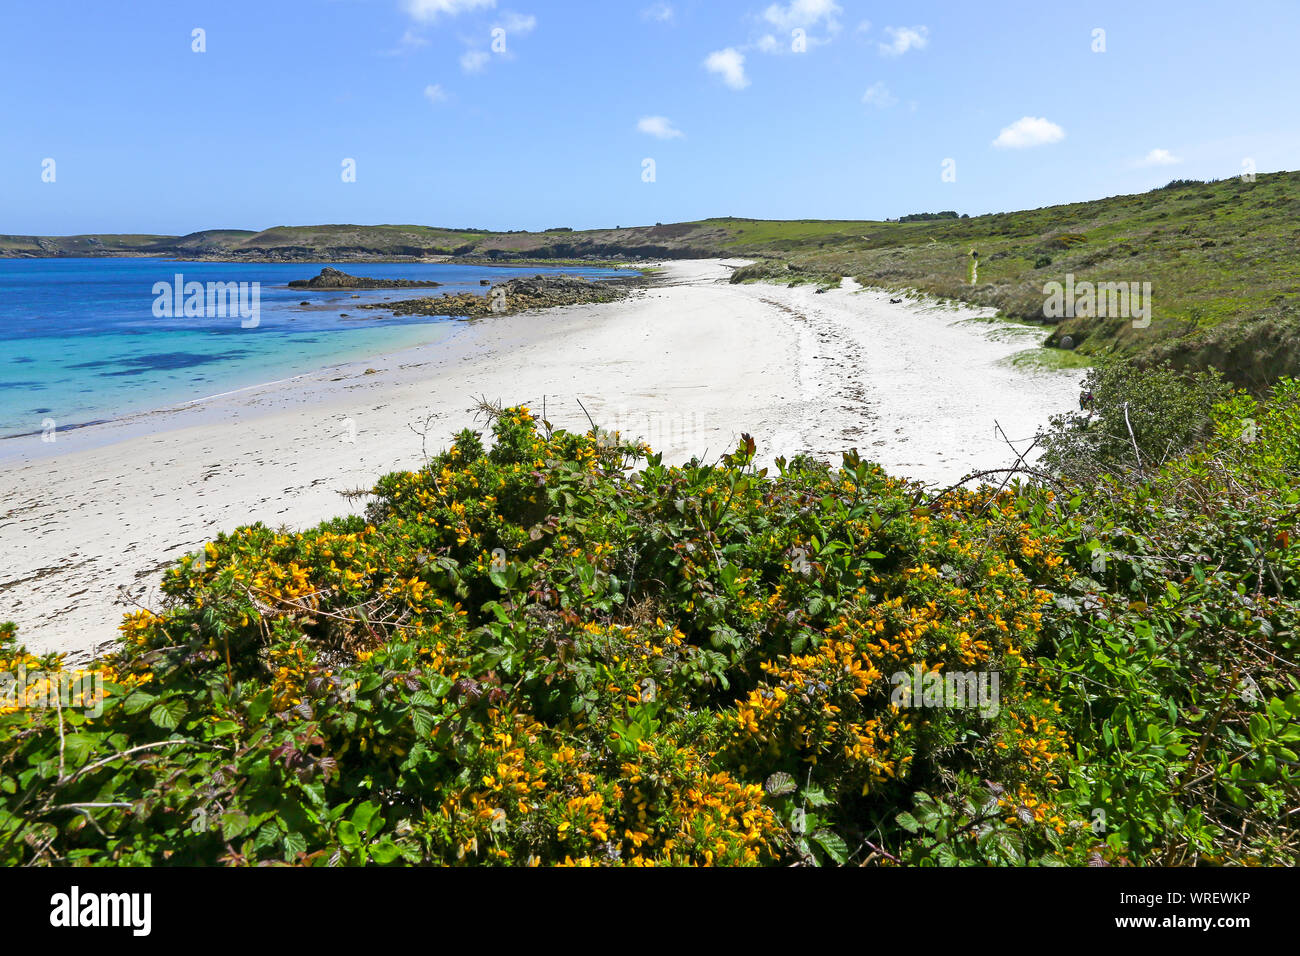 Great Bay in St Martin's Bay, St. Martin’s Island, Isles of Scilly, Cornwall, England, UK Stock Photo